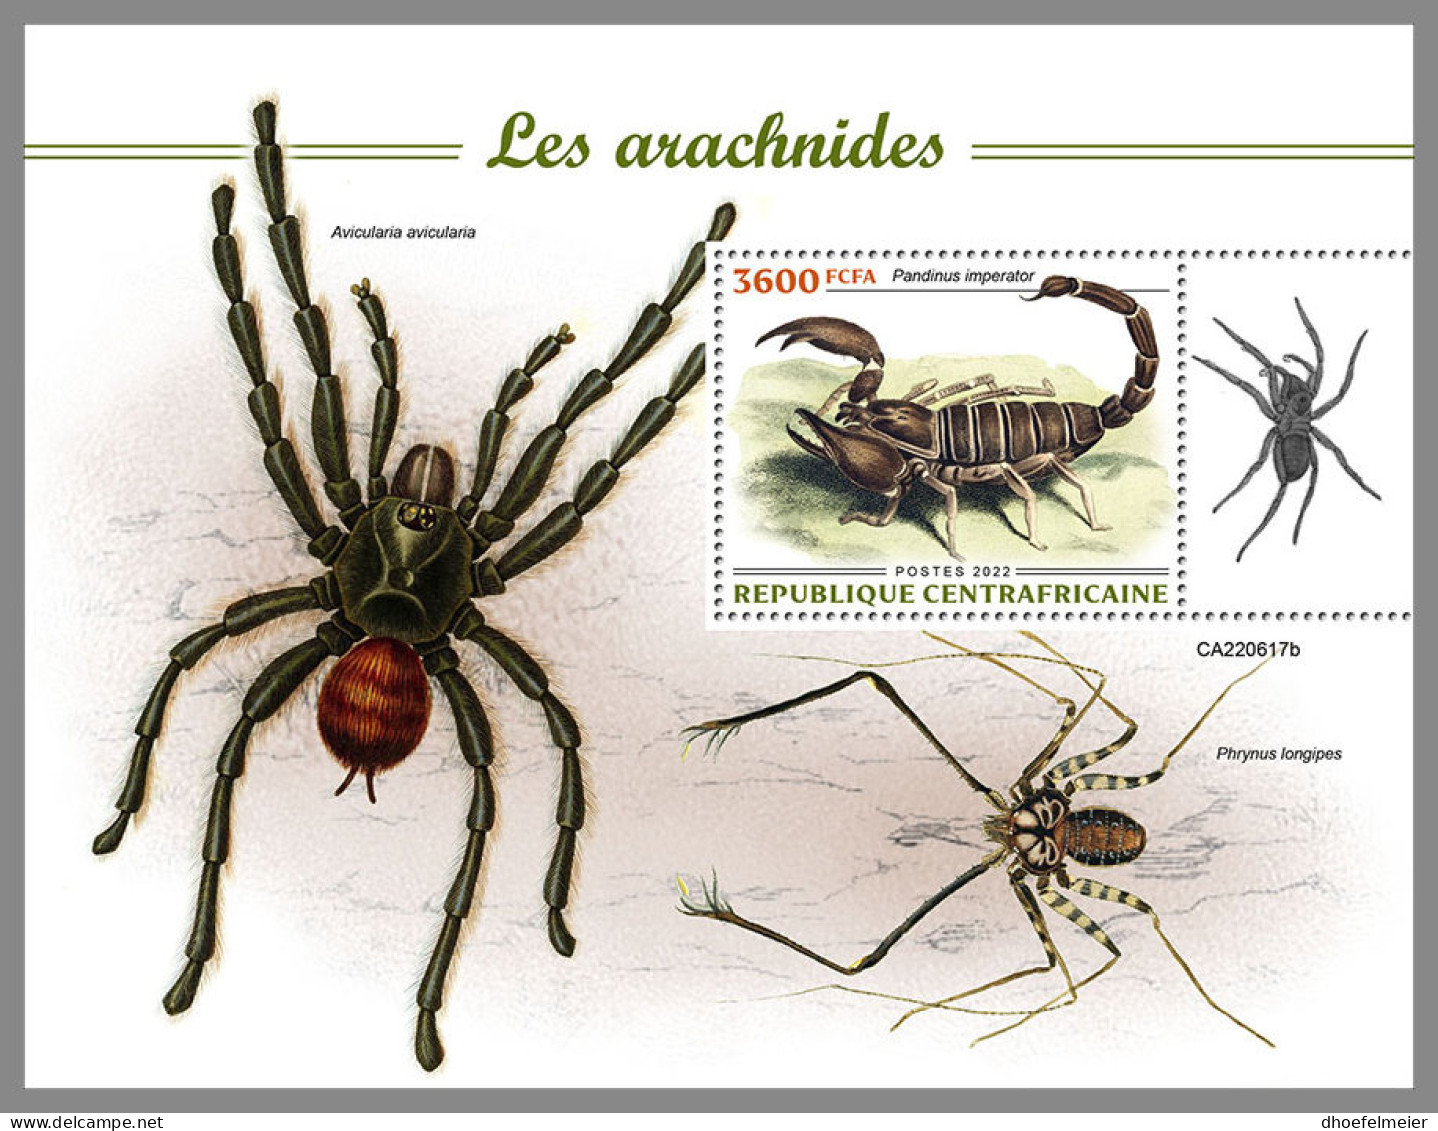 CENTRAL AFRICAN REP. 2022 MNH Arachnids Spinnentiere Arachnides S/S - OFFICIAL ISSUE - DHQ2314 - Arañas